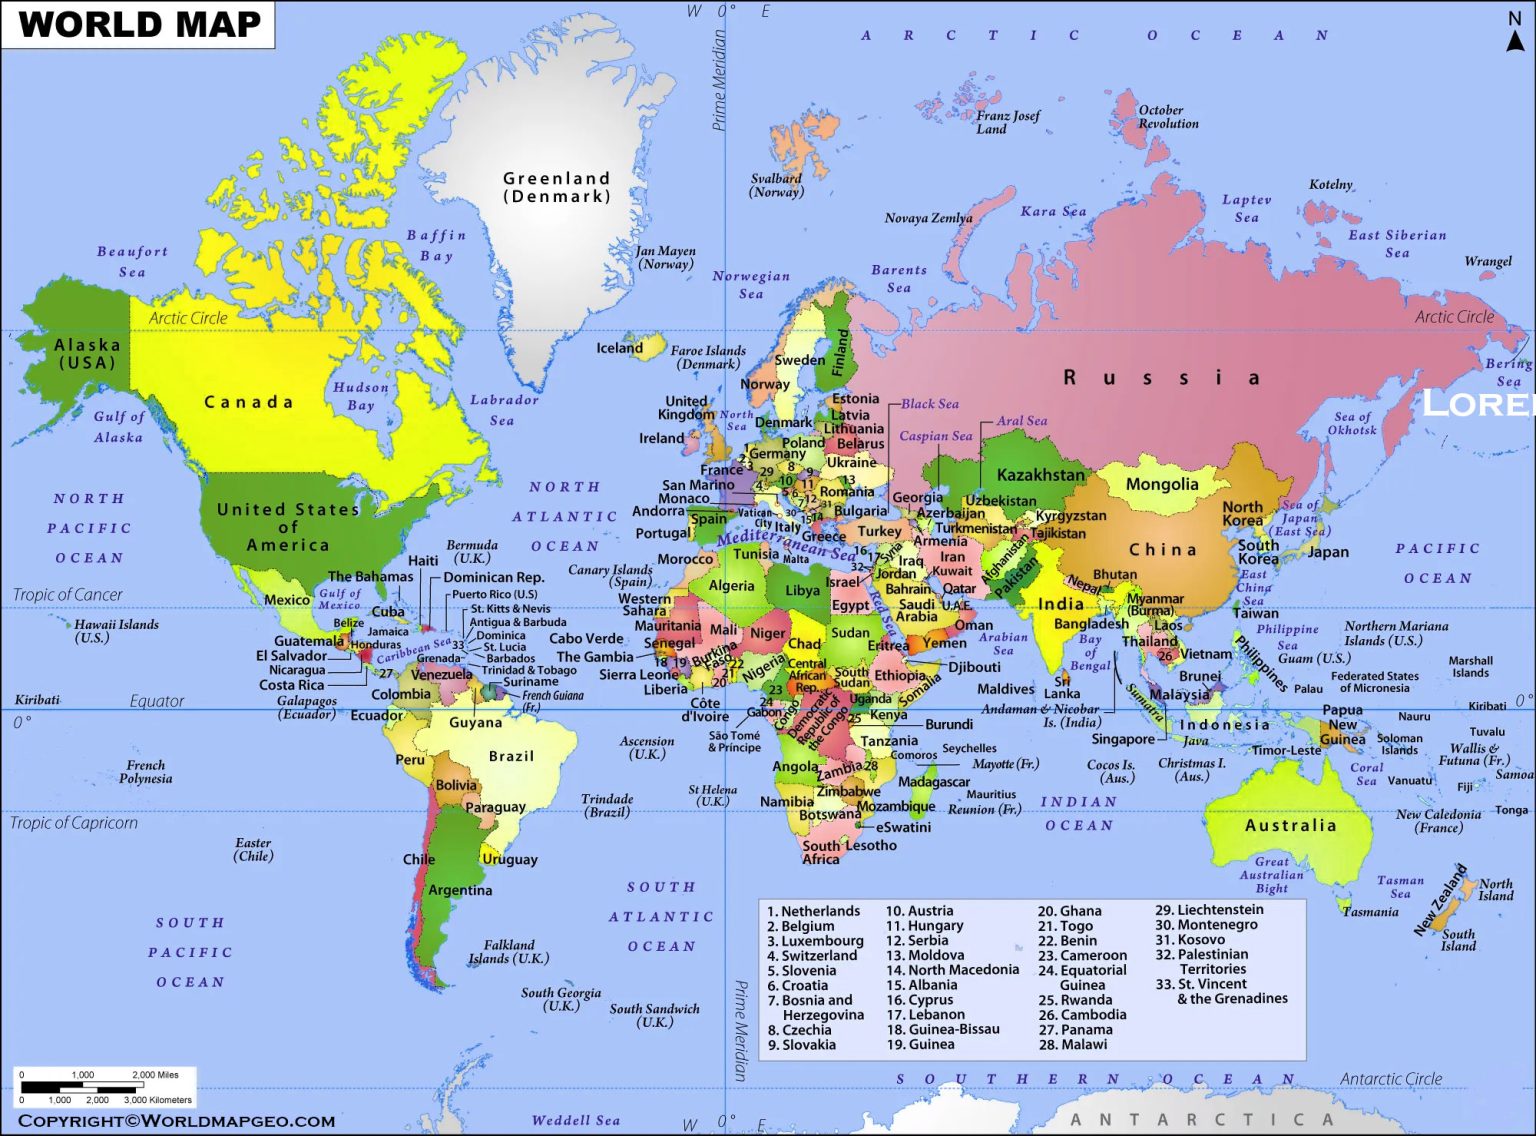 World Map Labeled Simple, Printable with Countries & Oceans